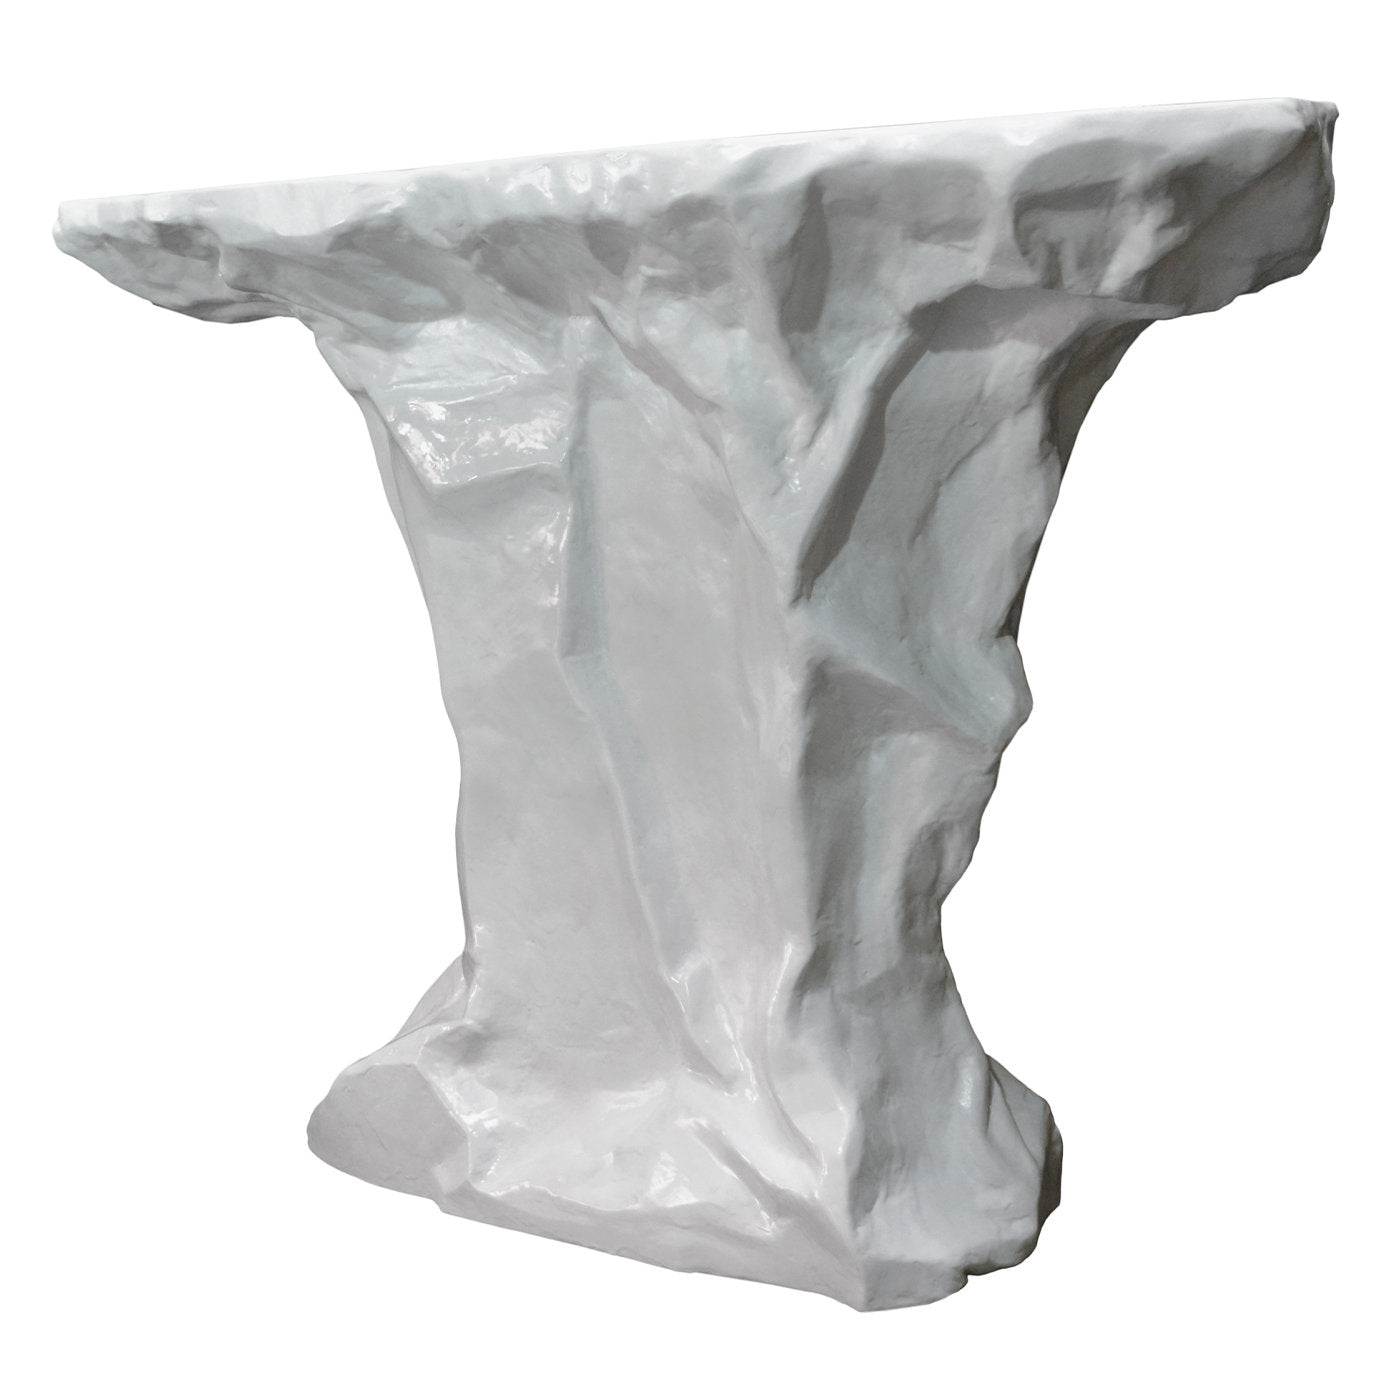 Glacial Sculpture Boreal Console Limited Edition - Alternative view 1